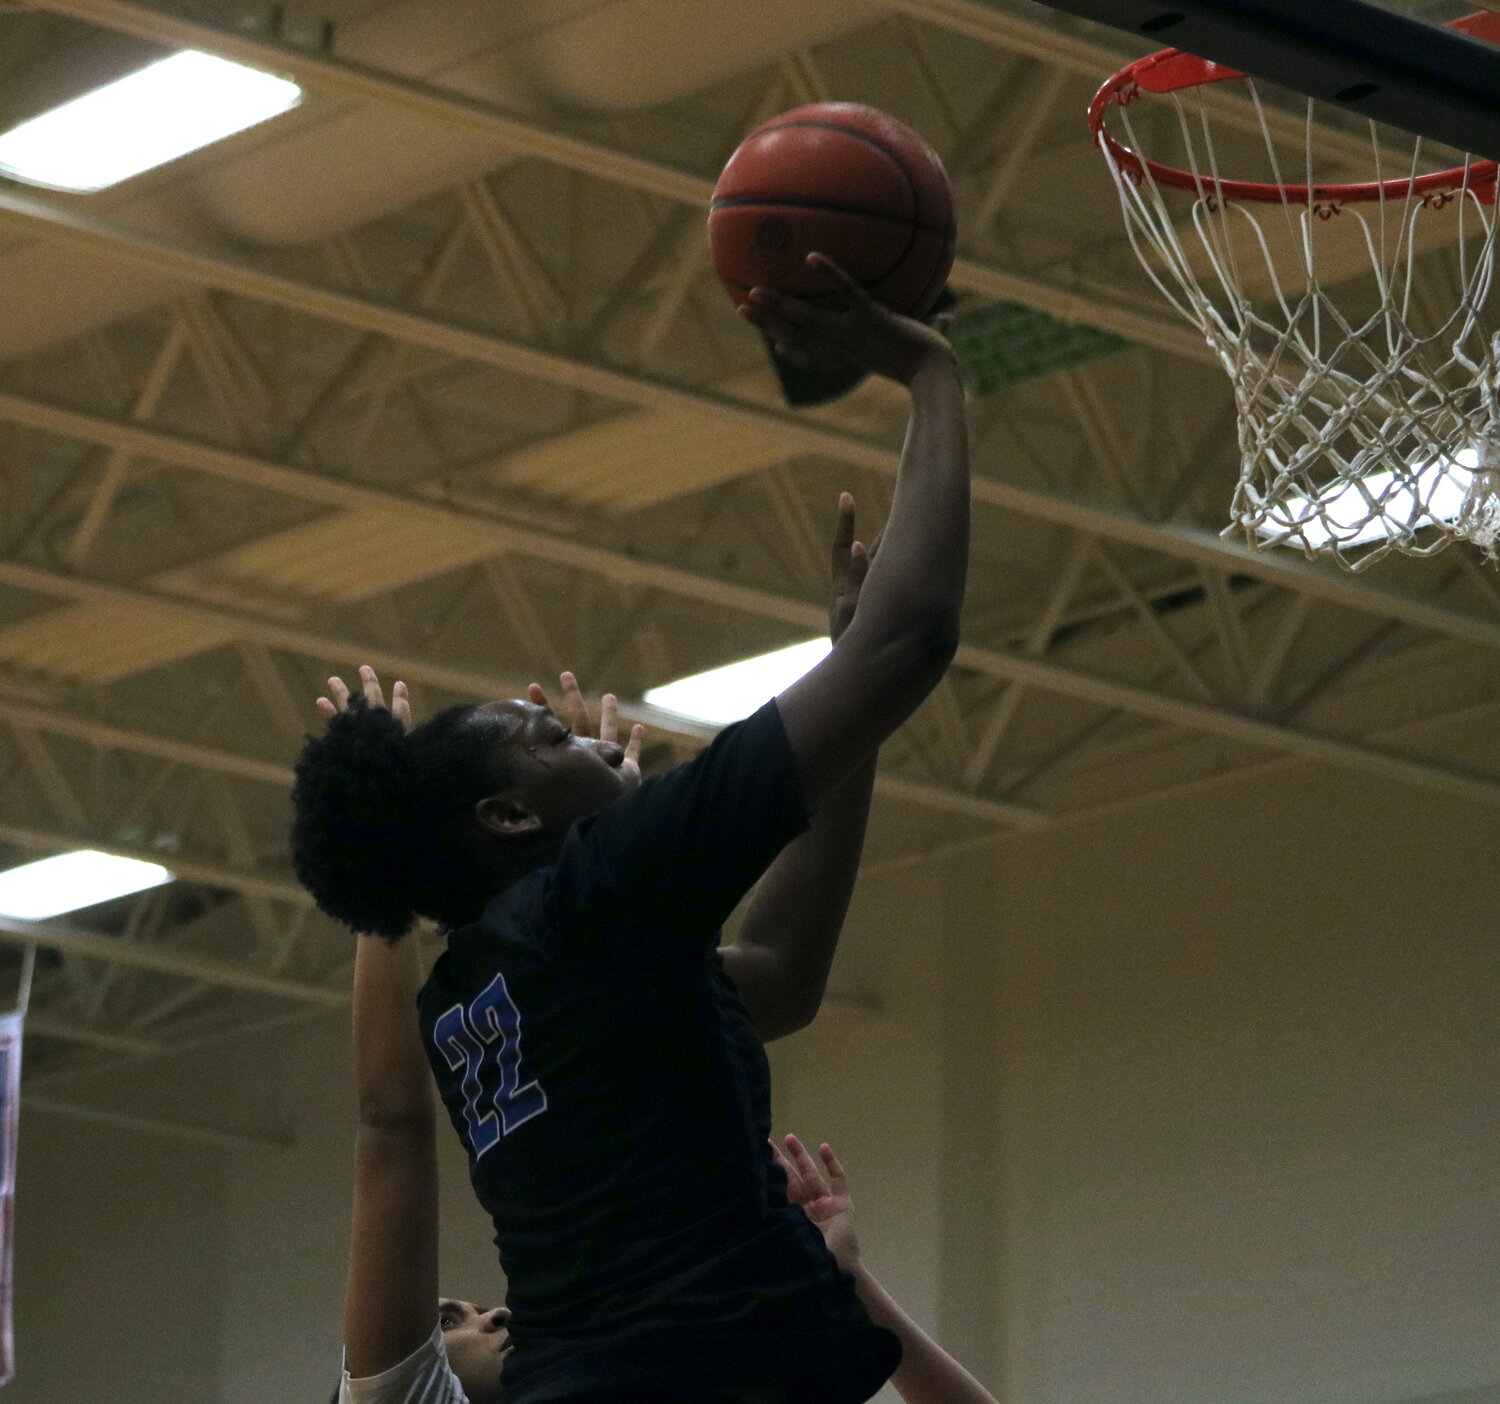 Timya Grice shoots a layup during Friday's game between Taylor and Tompkins at the Tompkins gym.